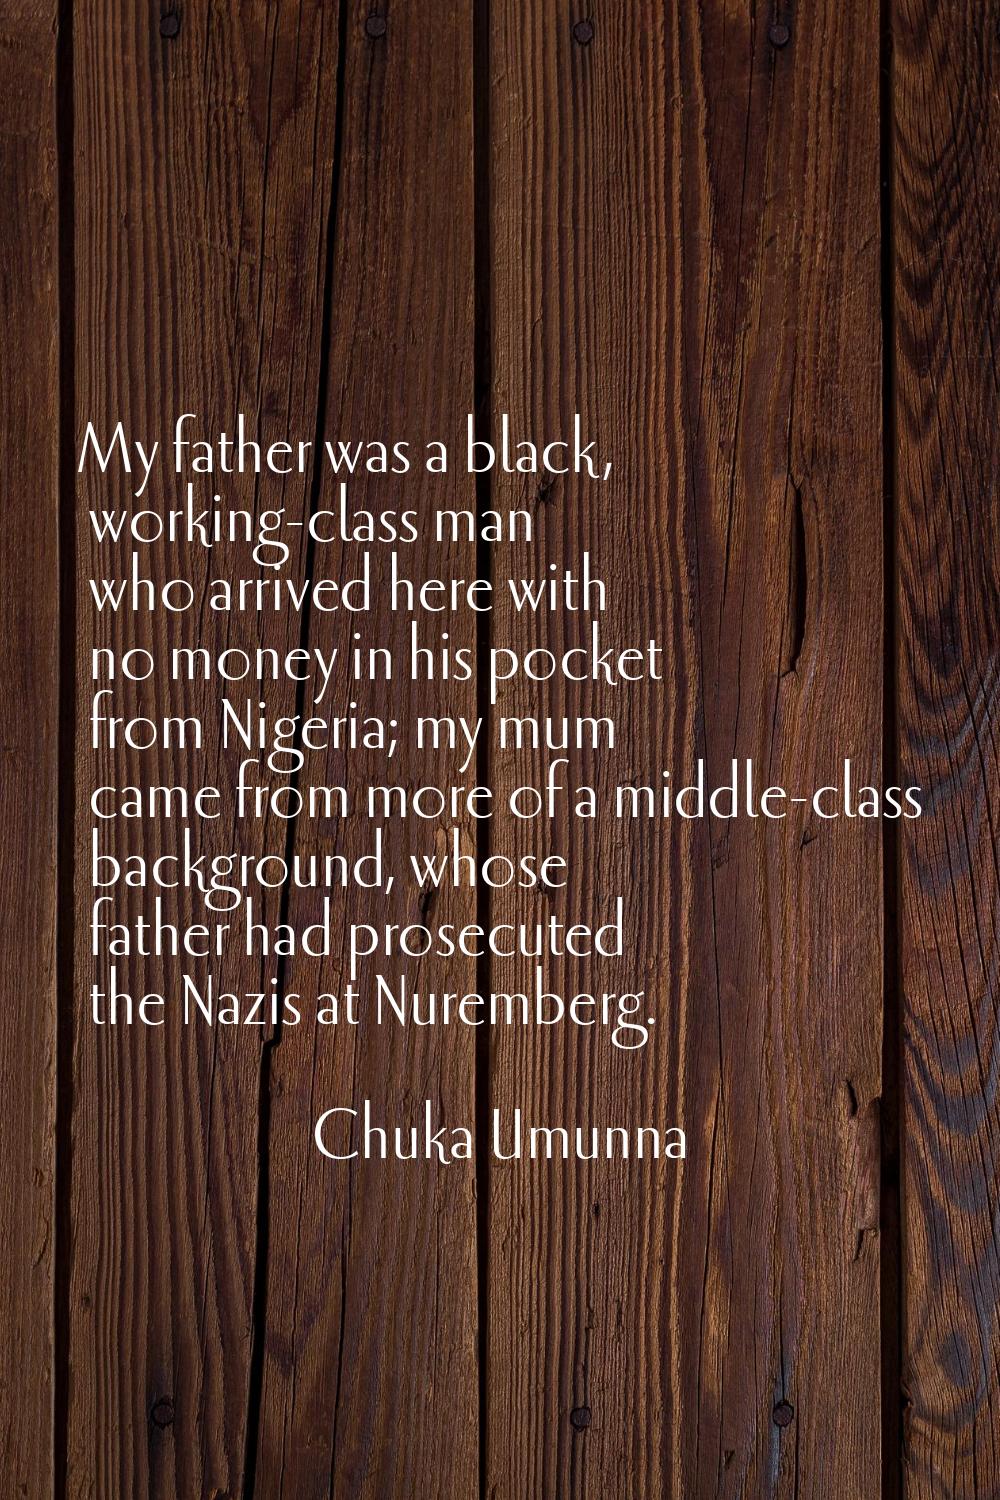 My father was a black, working-class man who arrived here with no money in his pocket from Nigeria;